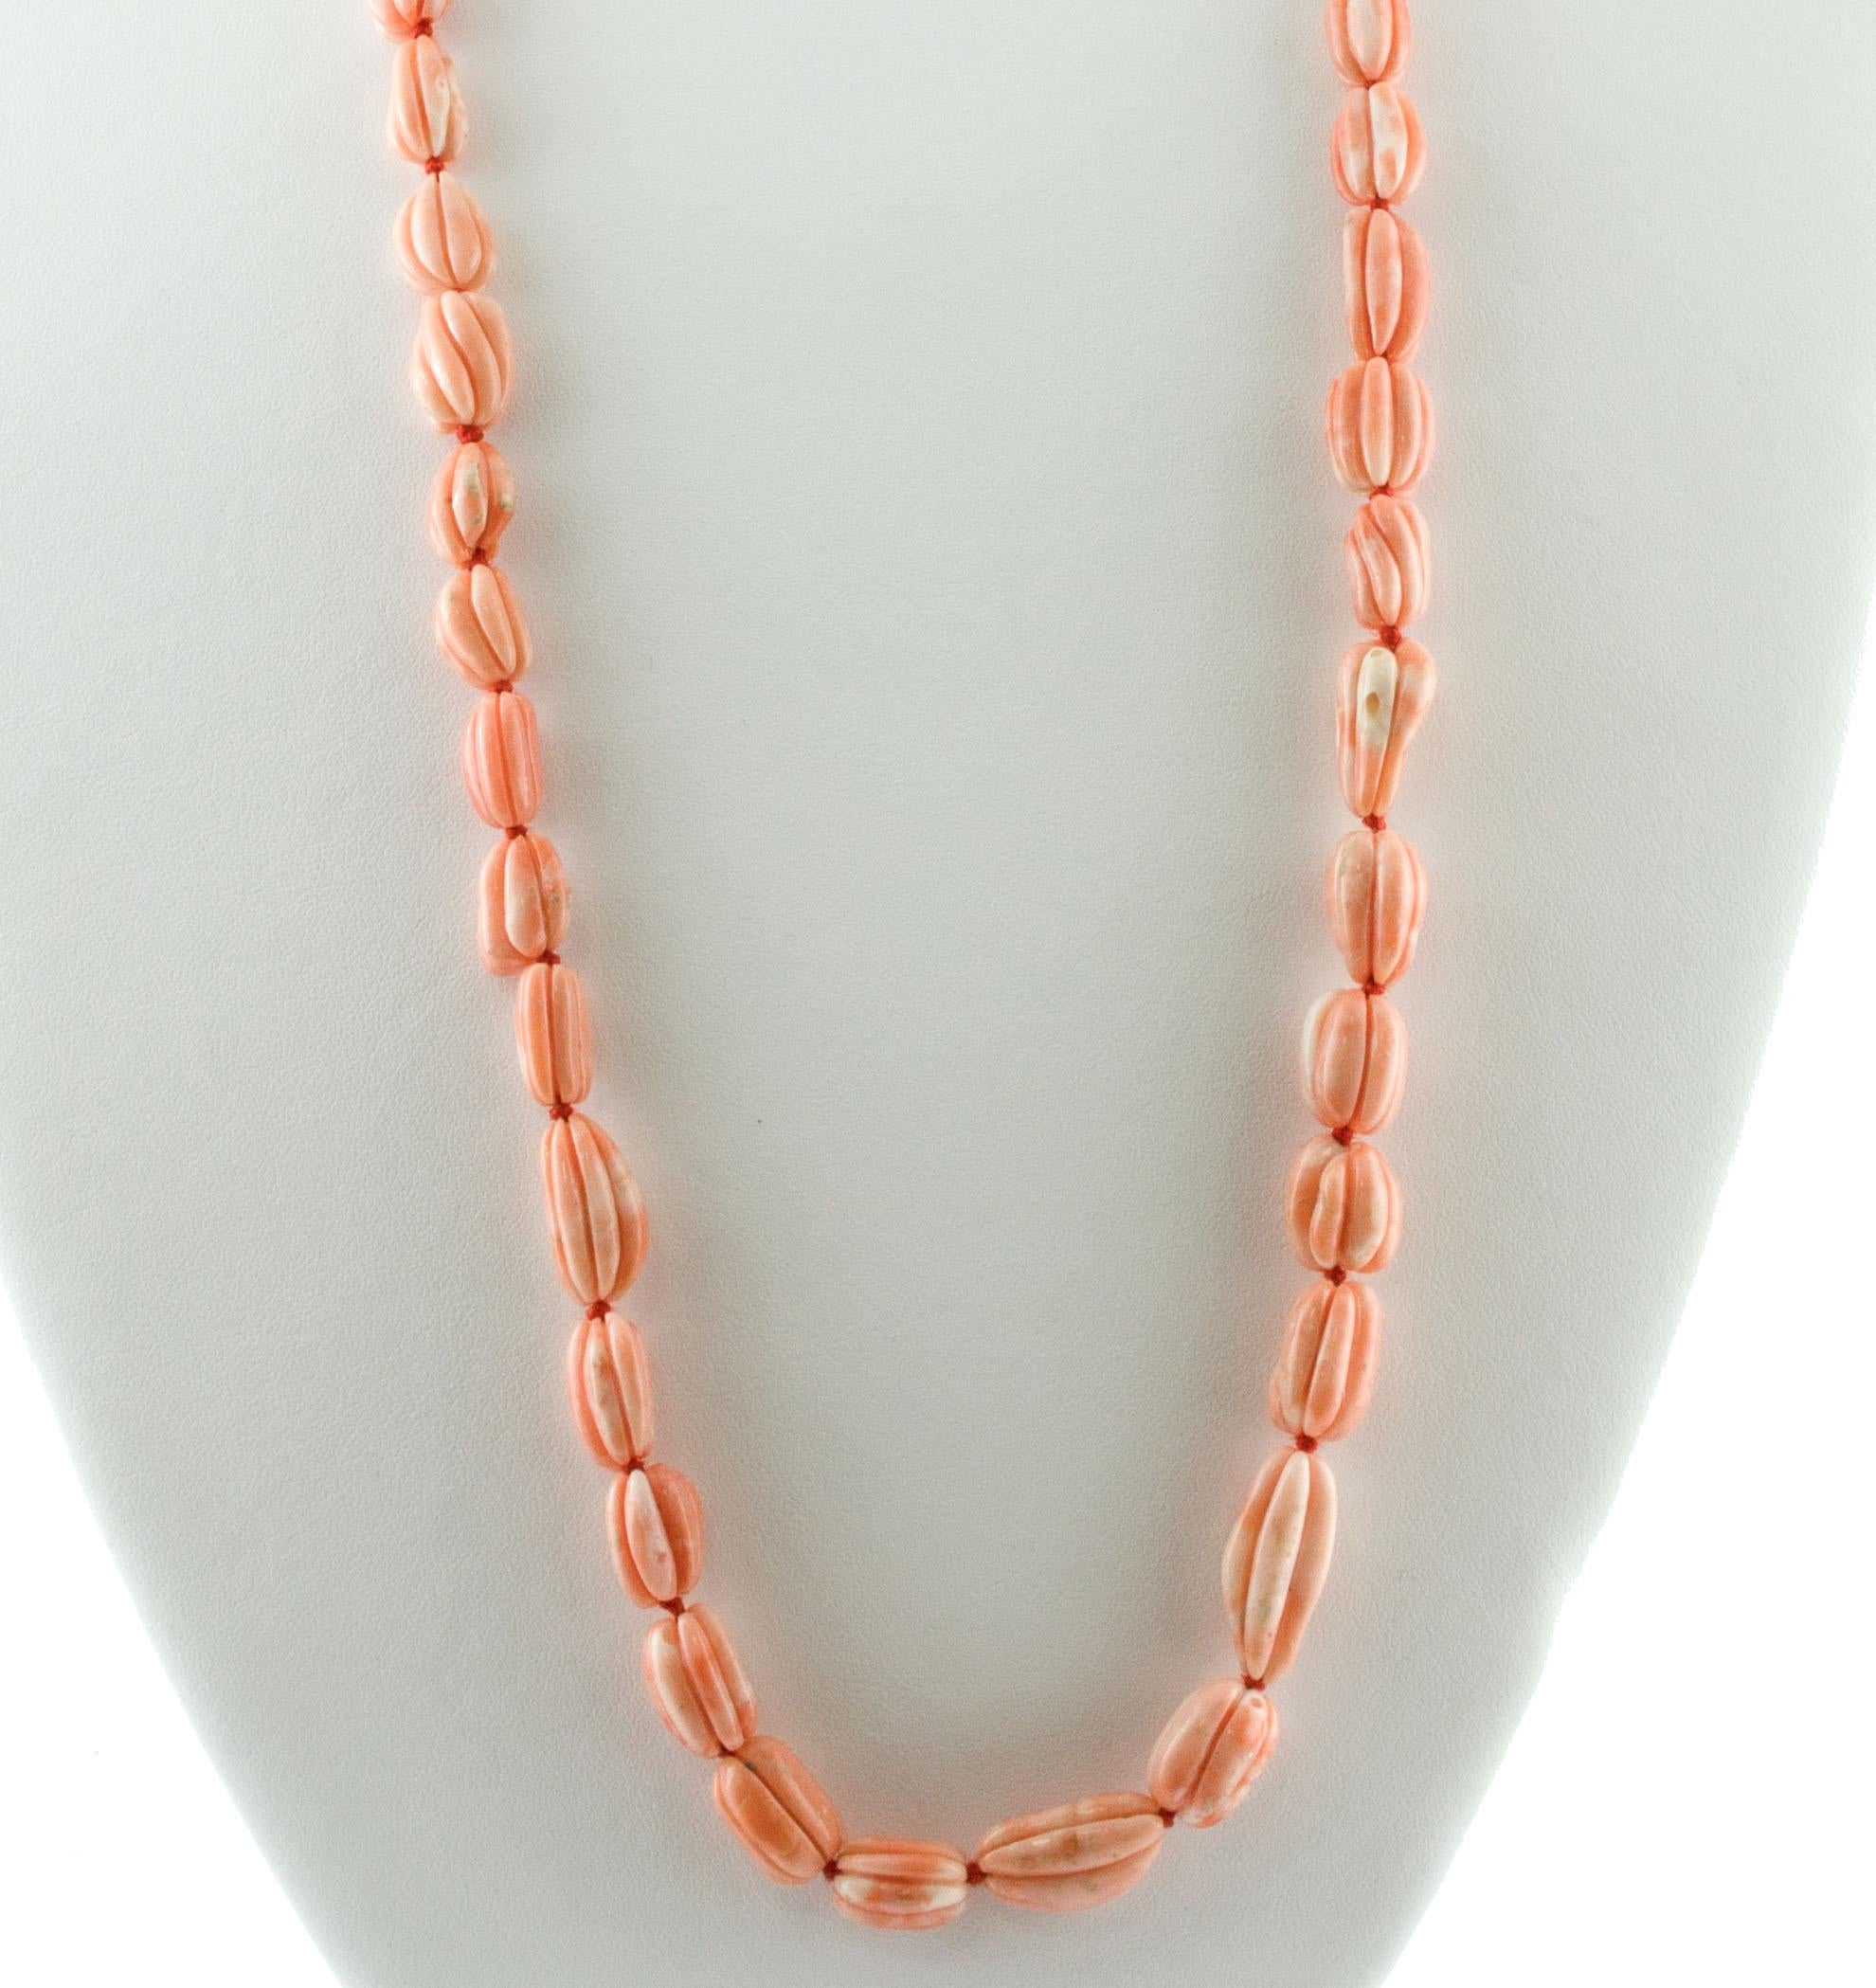 SHIPPING POLICY:
No additional costs will be added to this order.
Shipping costs will be totally covered by the seller (customs duties included).

Wonderful long coral necklace, realized with 117.3 g of pink coral secundum finely carved by Italian